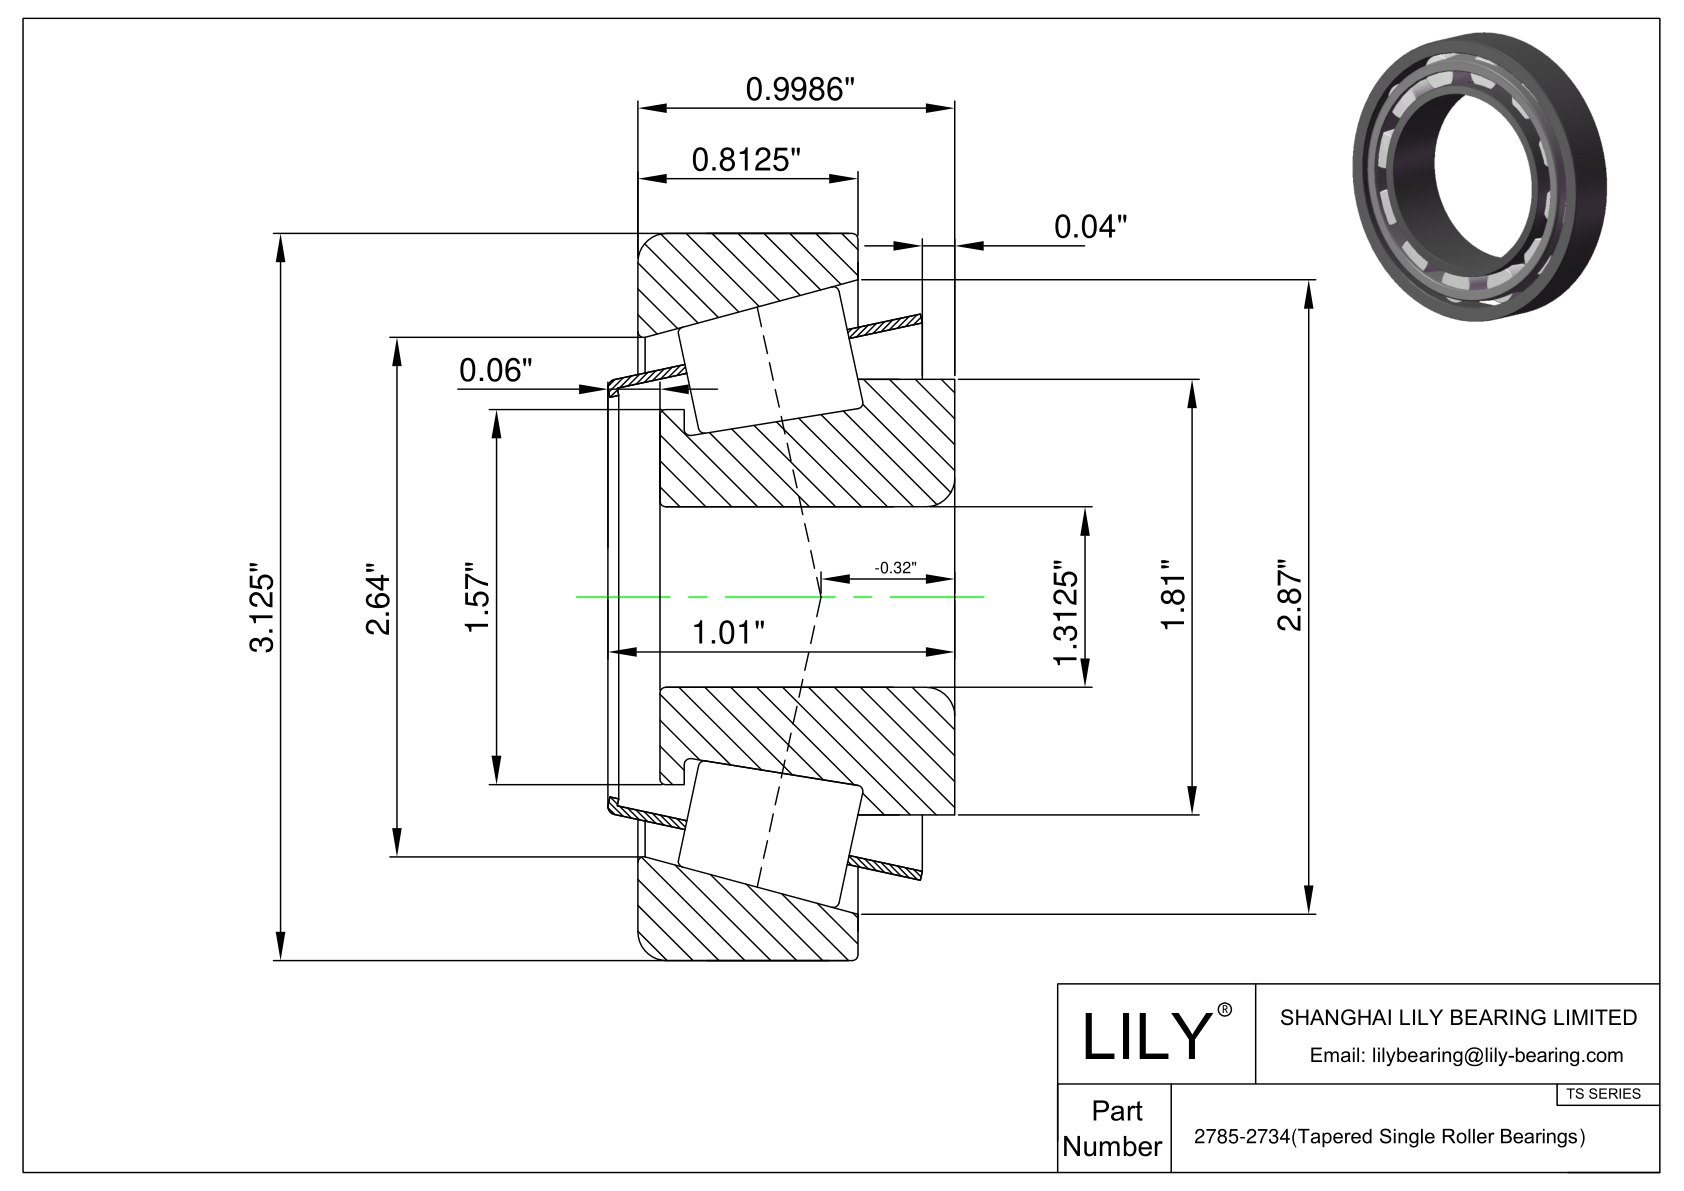 2785-2734 TS (Tapered Single Roller Bearings) (Imperial) cad drawing